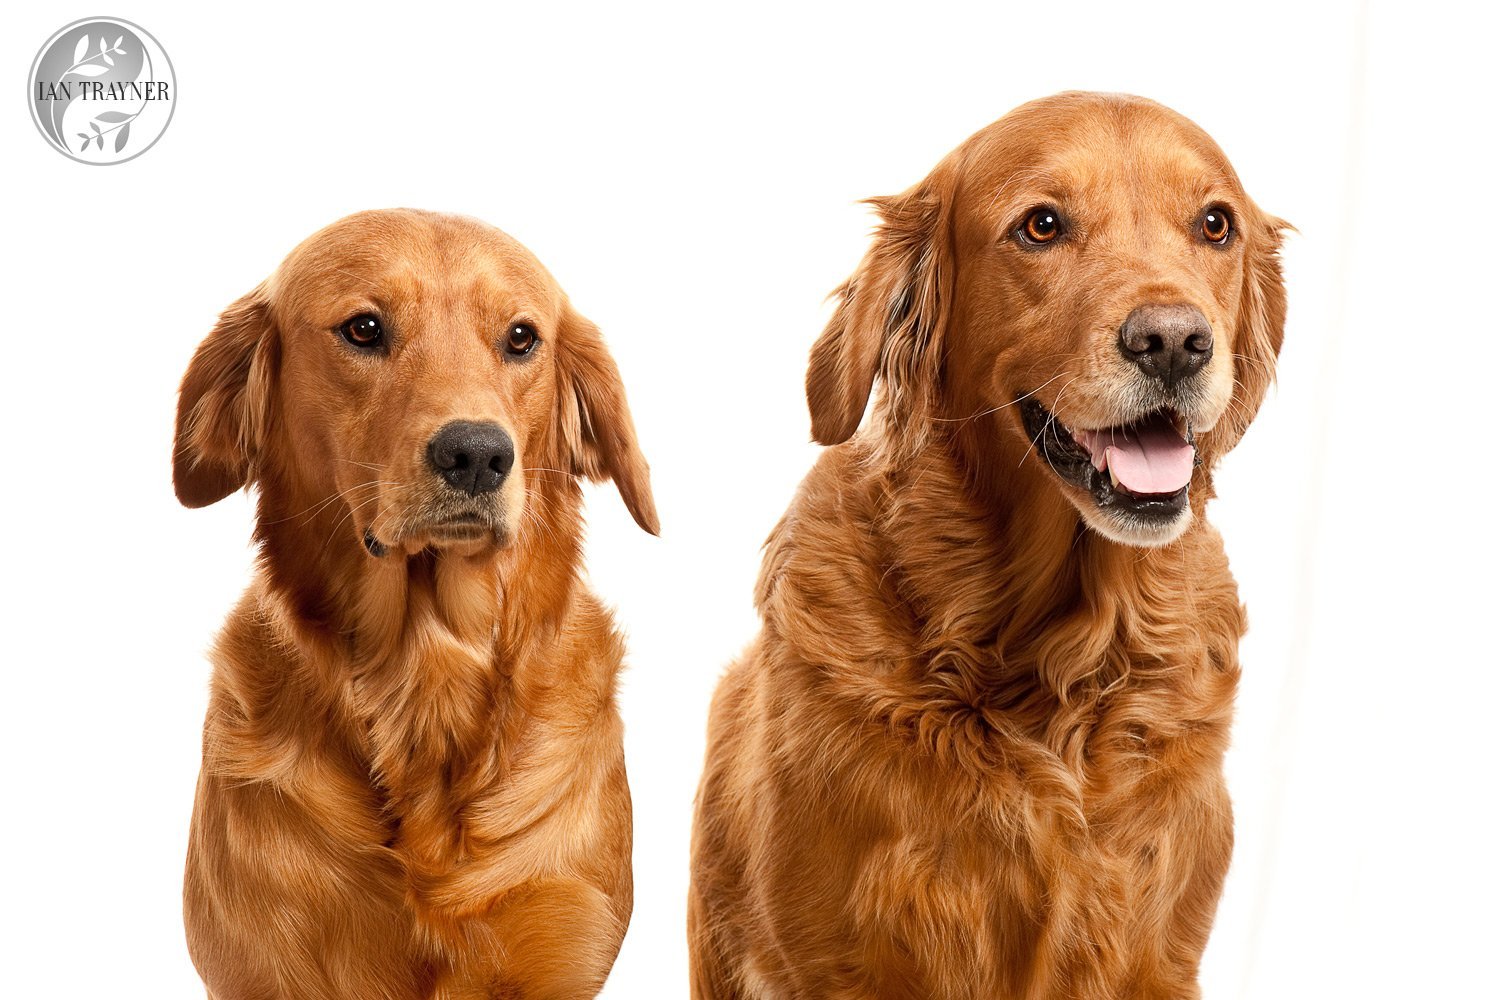 High key photo of two golden retrievers. Looks like a studio but was taken in the owner's living room.